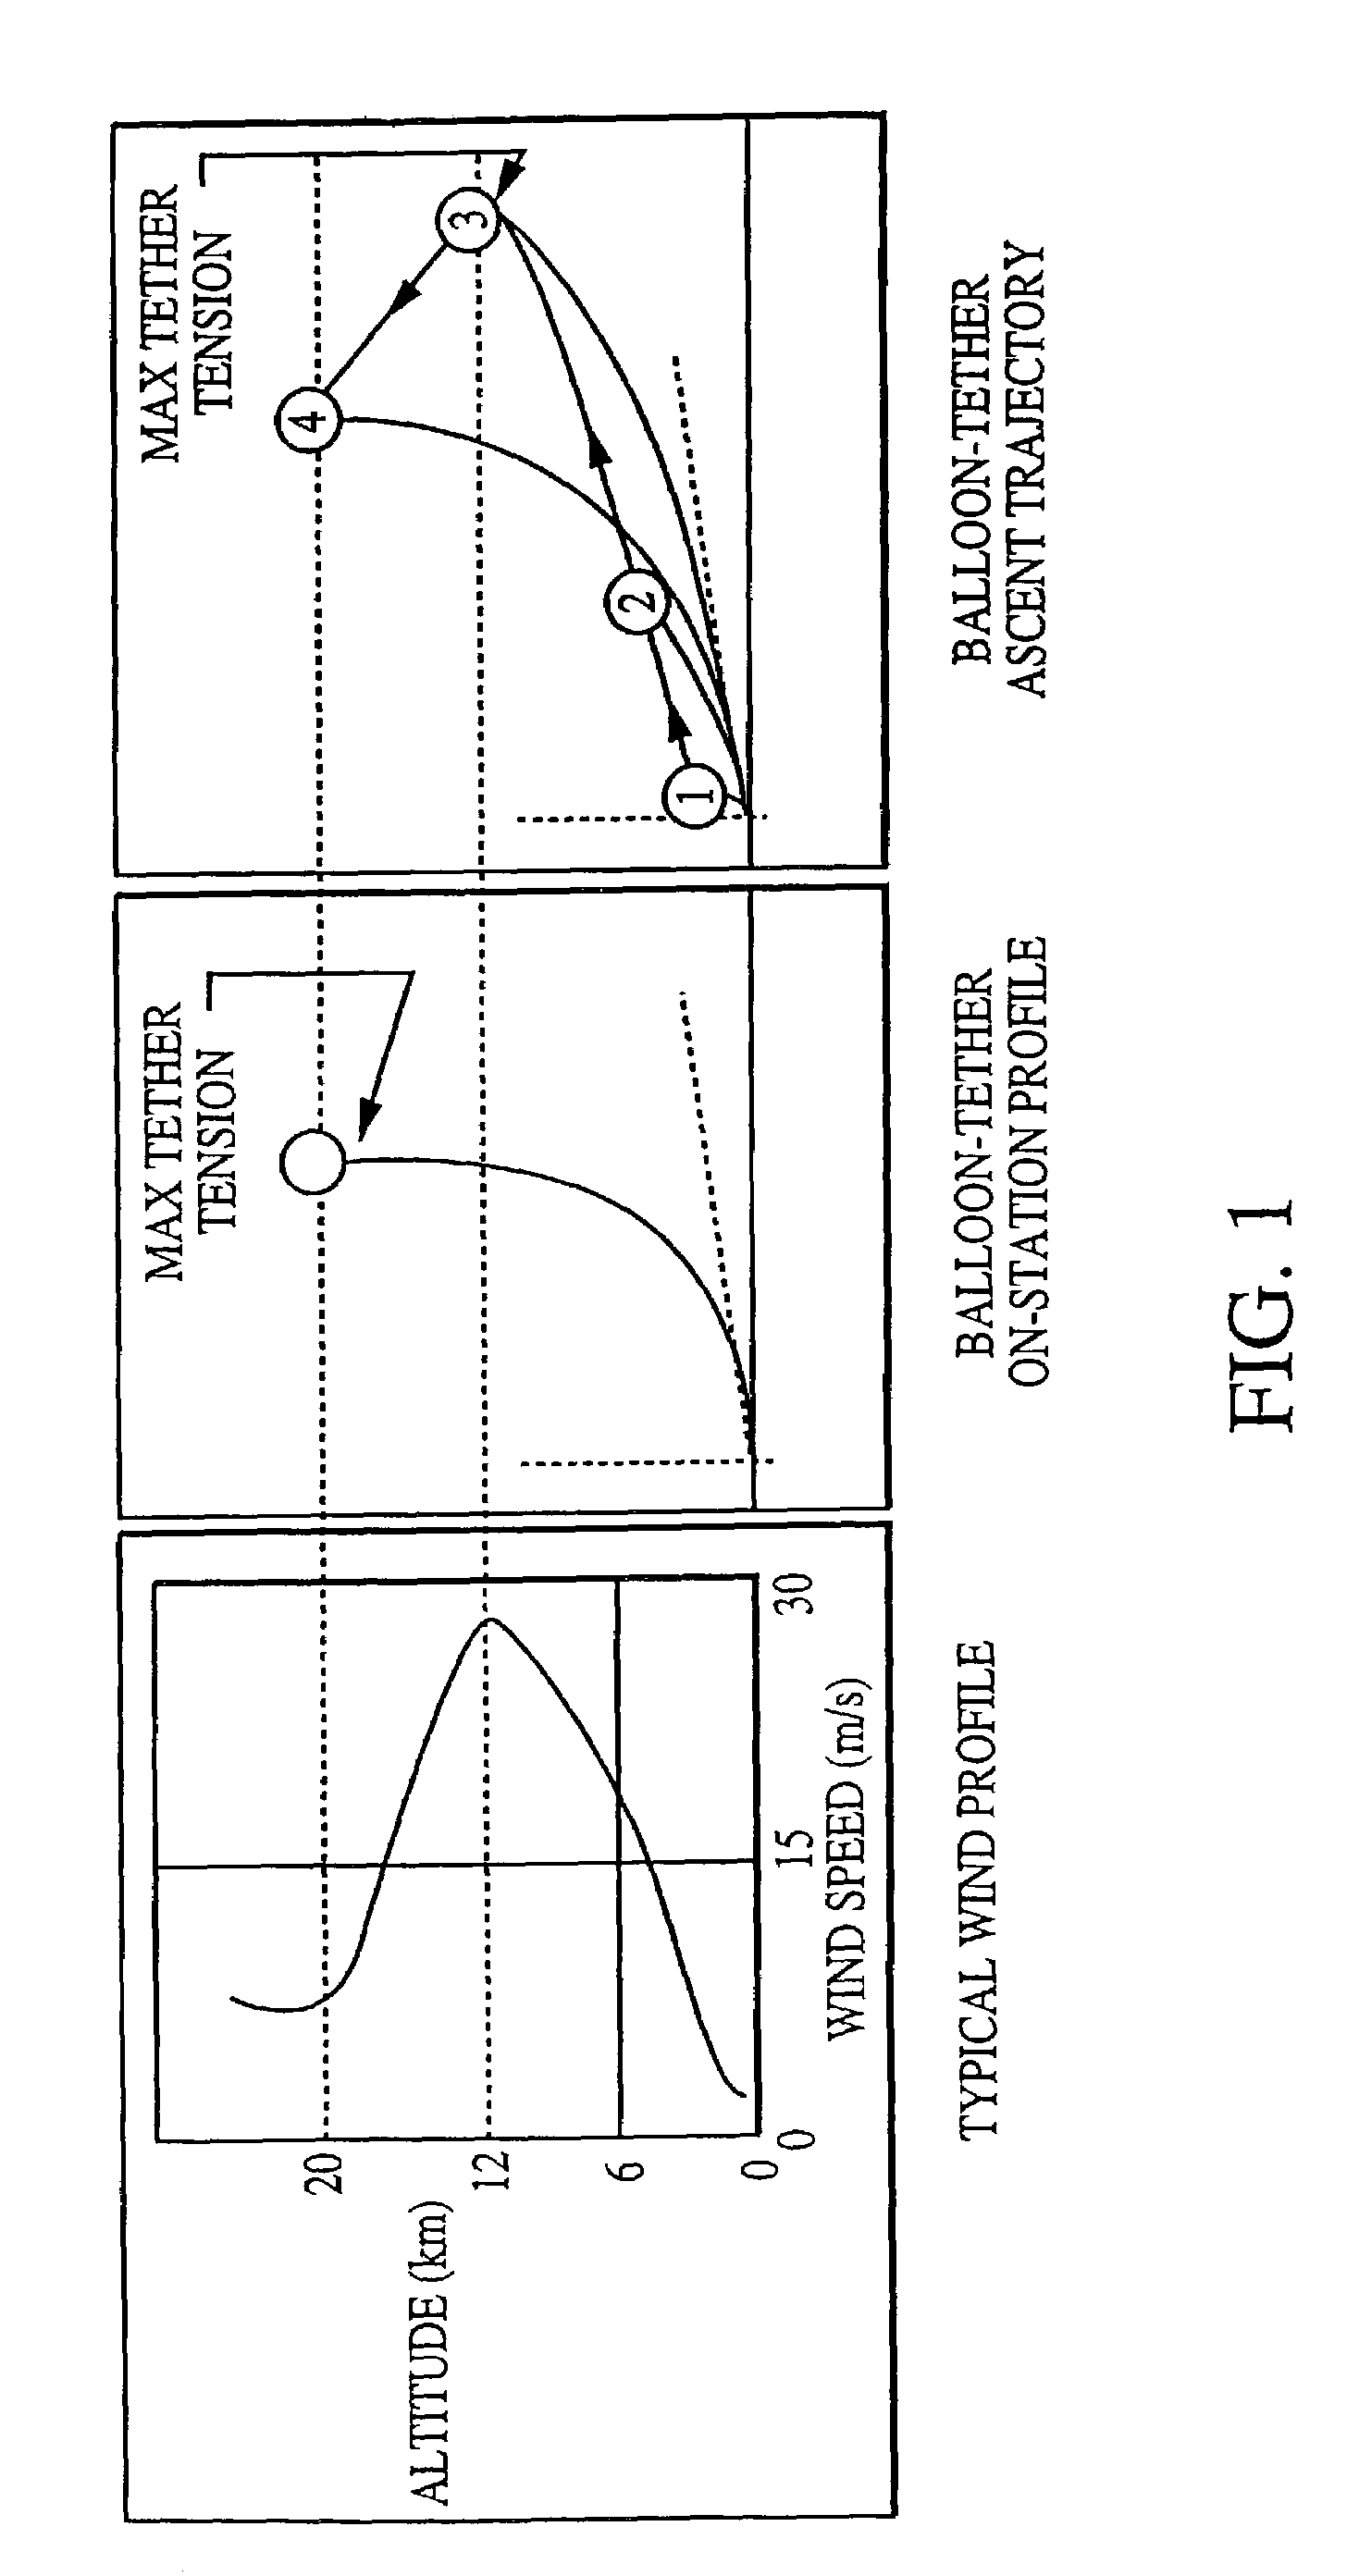 Optical communication system using a high altitude tethered balloon